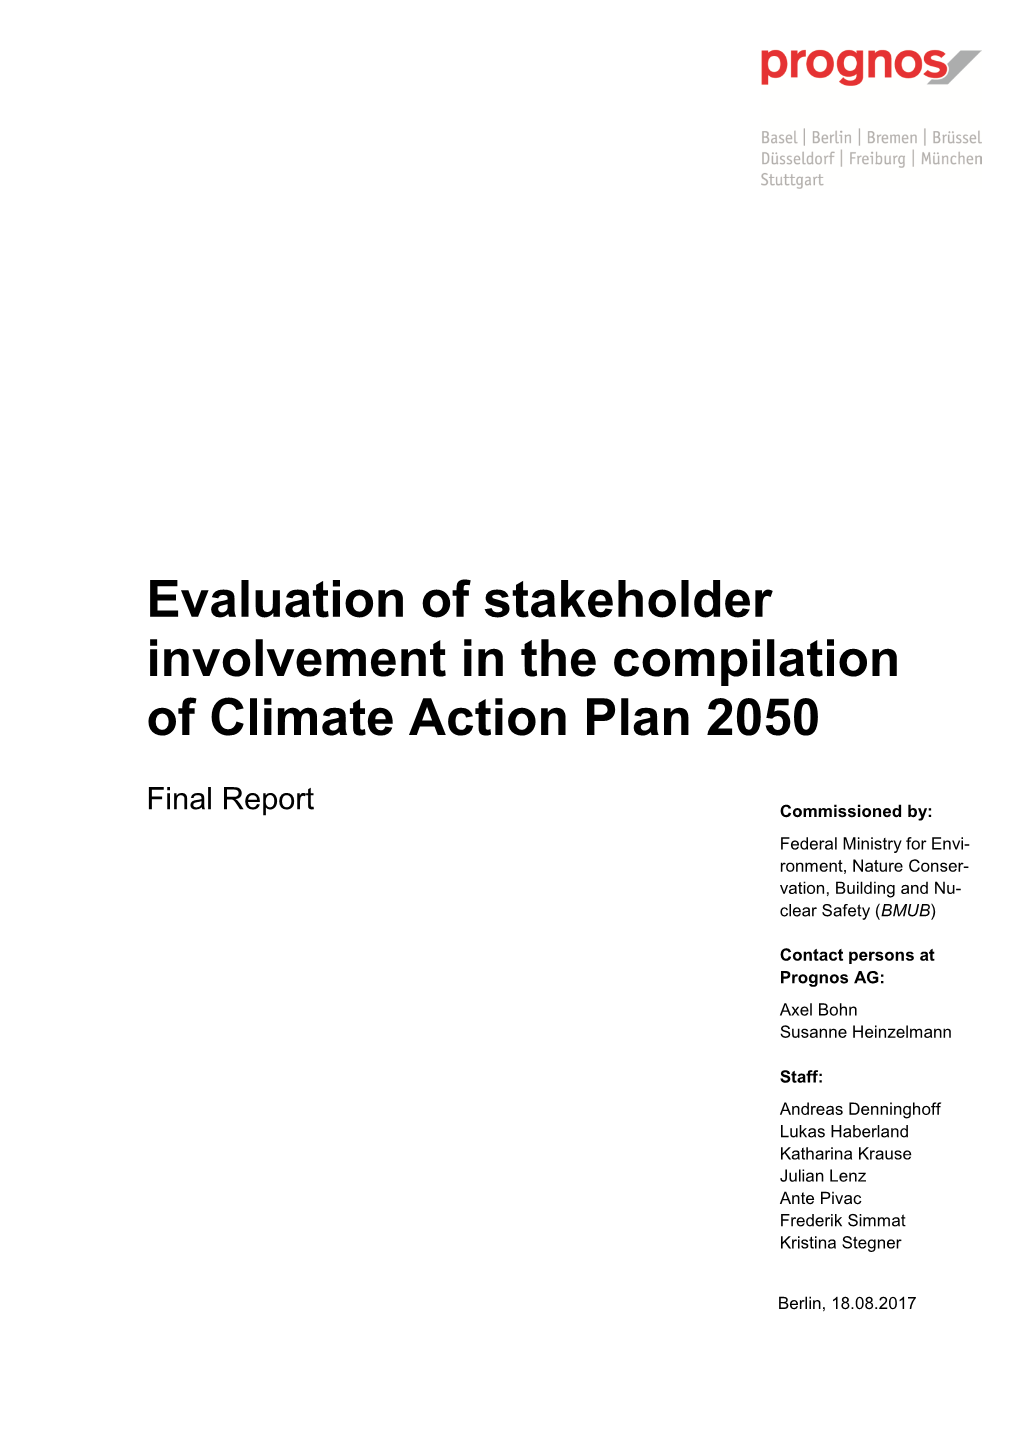 Evaluation of Stakeholder Involvement in the Compilation of Climate Action Plan 2050